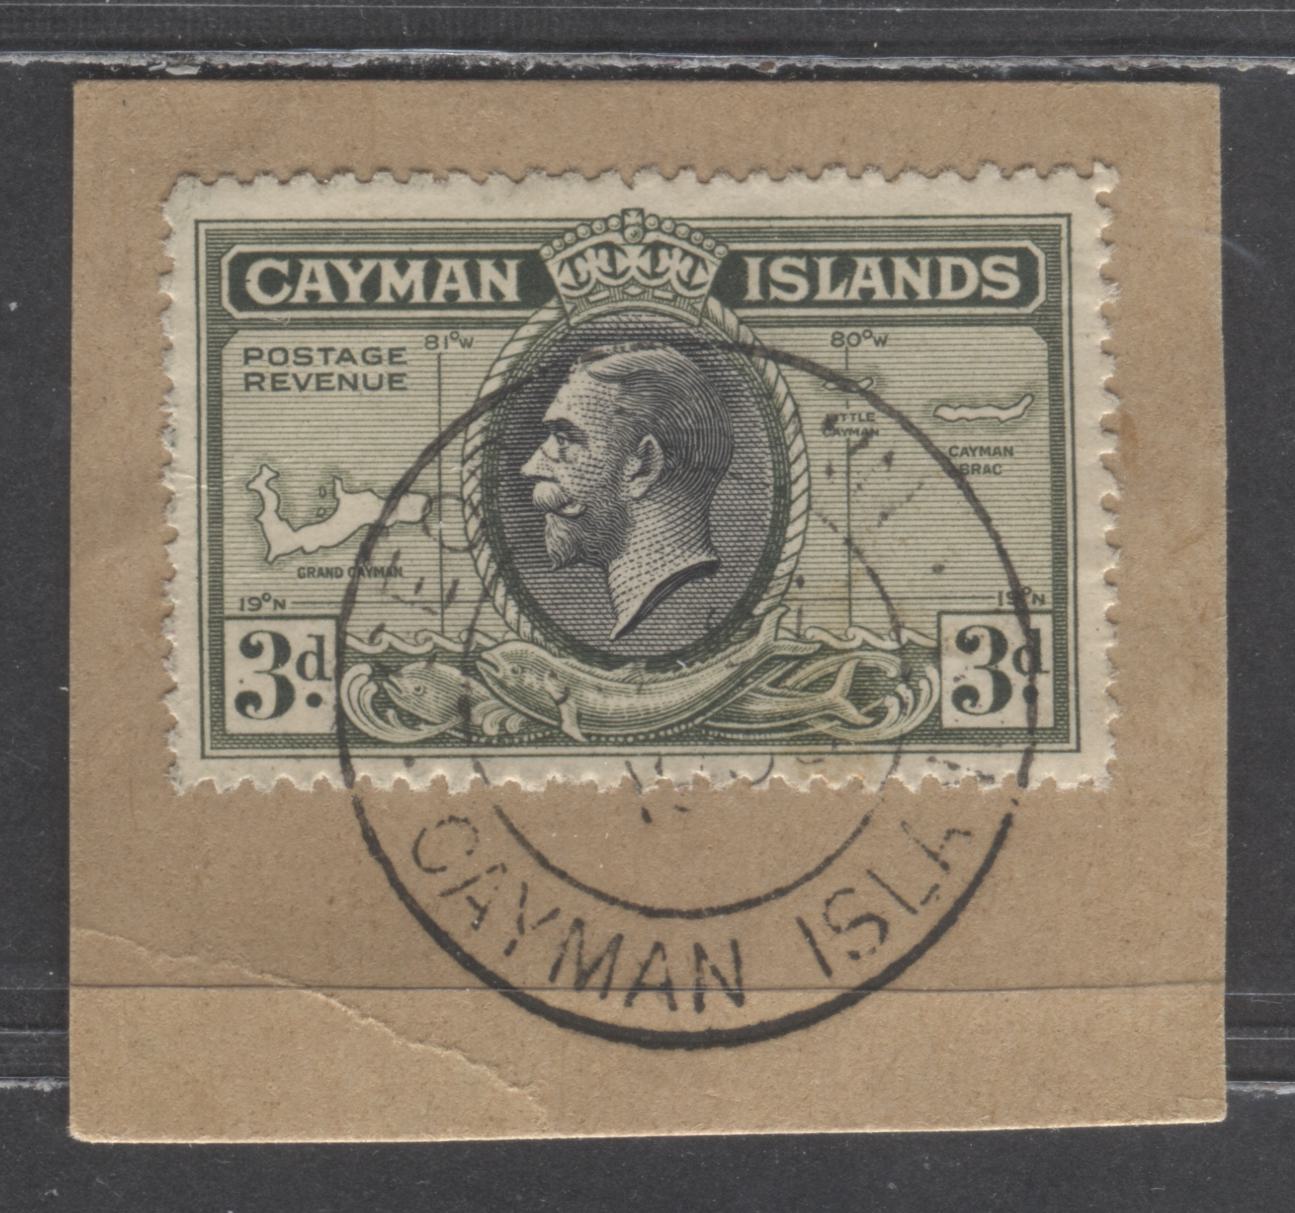 Lot 9 Cayman Islands SC#91 3d Olive Green & Black 1935-1936 Pictorial Definitives, CDS Used On Piece, A Very Fine Used Single, Click on Listing to See ALL Pictures, 2022 Scott Classic Cat. $3.75 USD